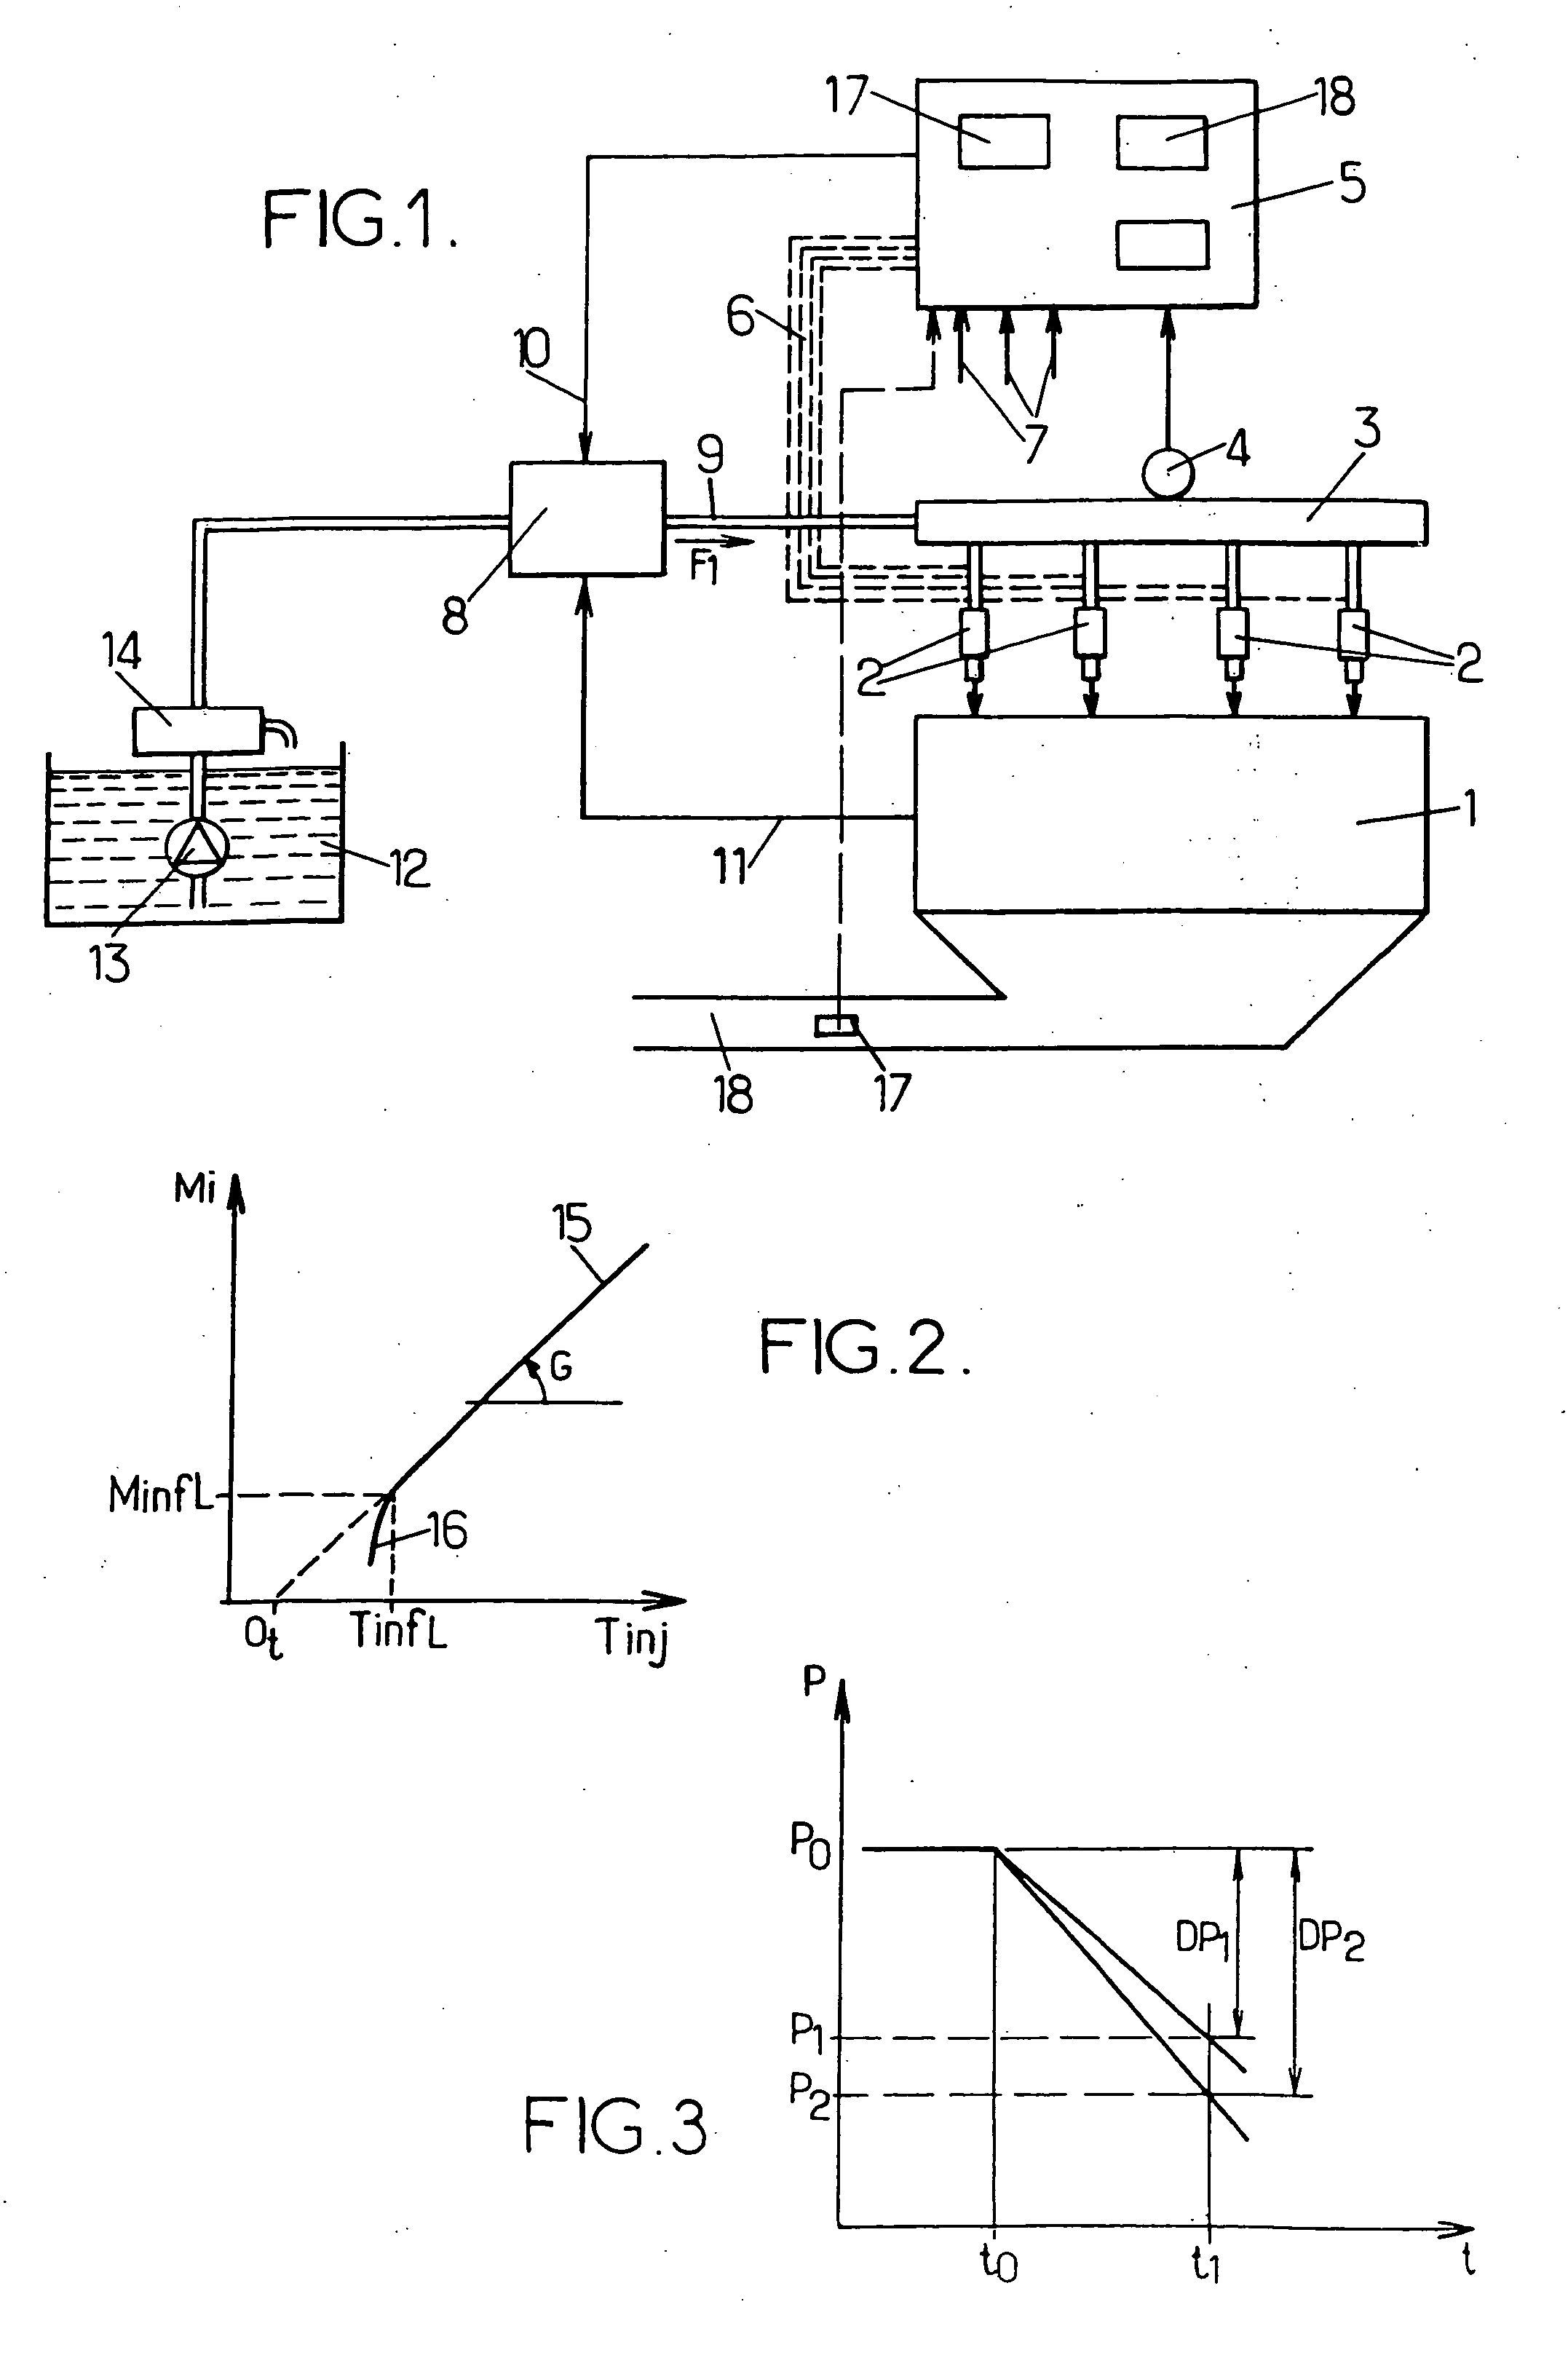 Method of determining in real time the flow rate characteristic of a fuel injector